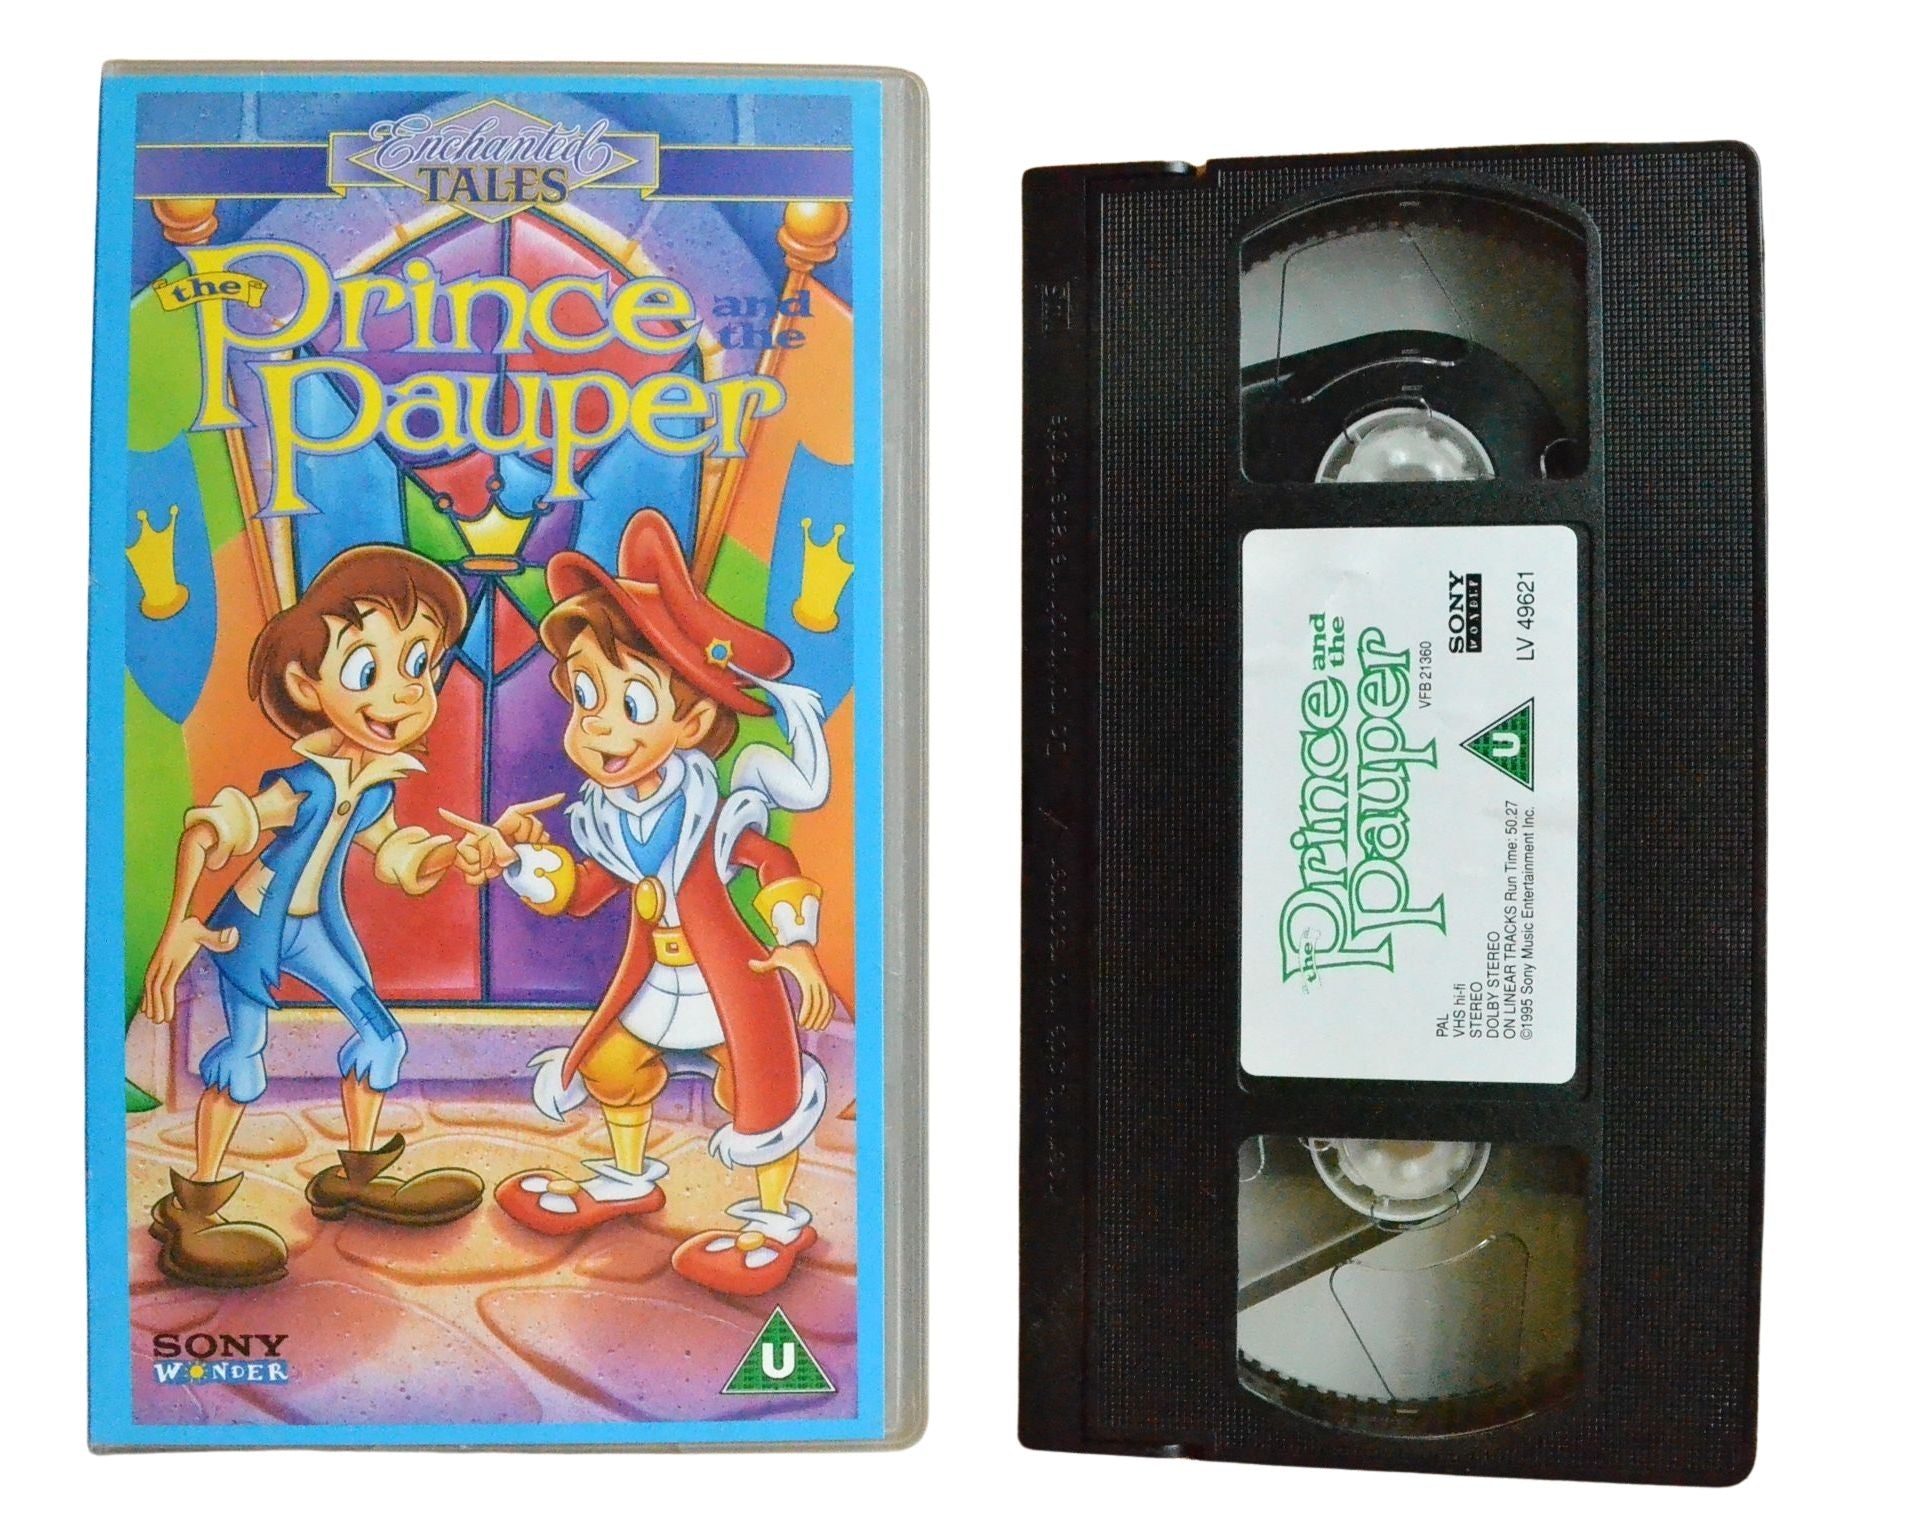 The Prince and the Pauper - Children’s - Pal VHS-